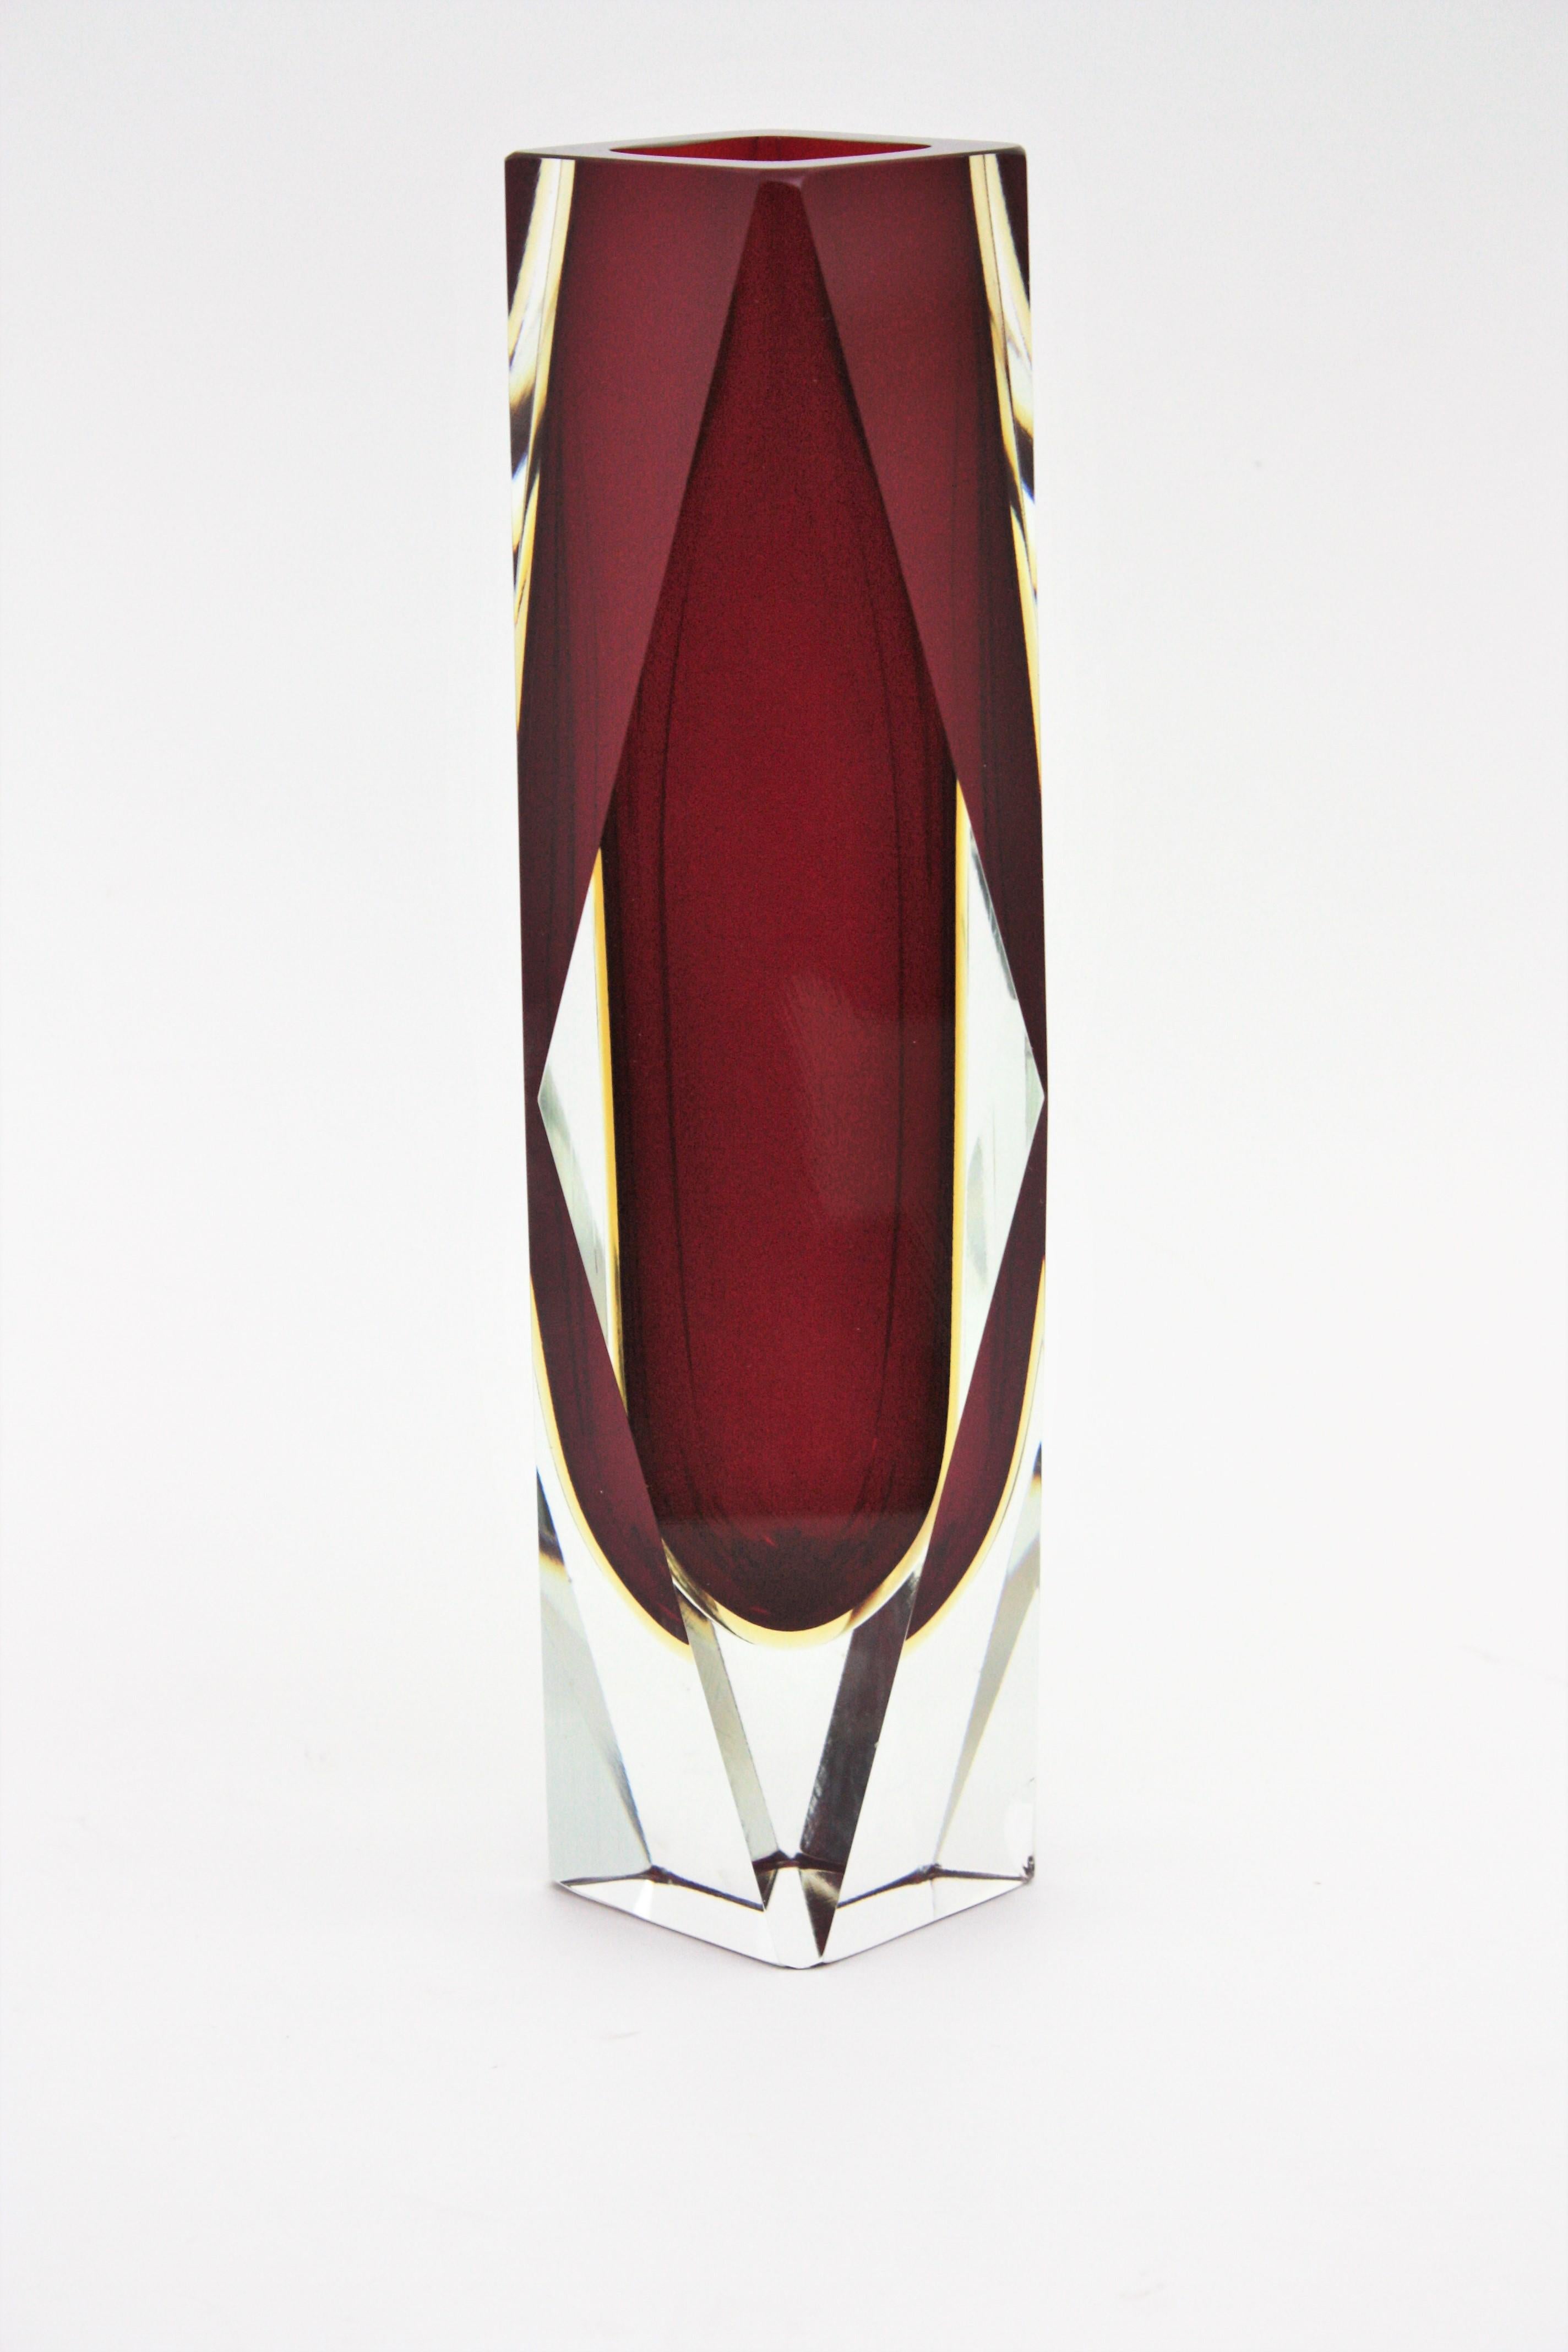 Massive Mandruzzato Murano Faceted Sommerso Red and Yellow Art Glass Vase For Sale 1